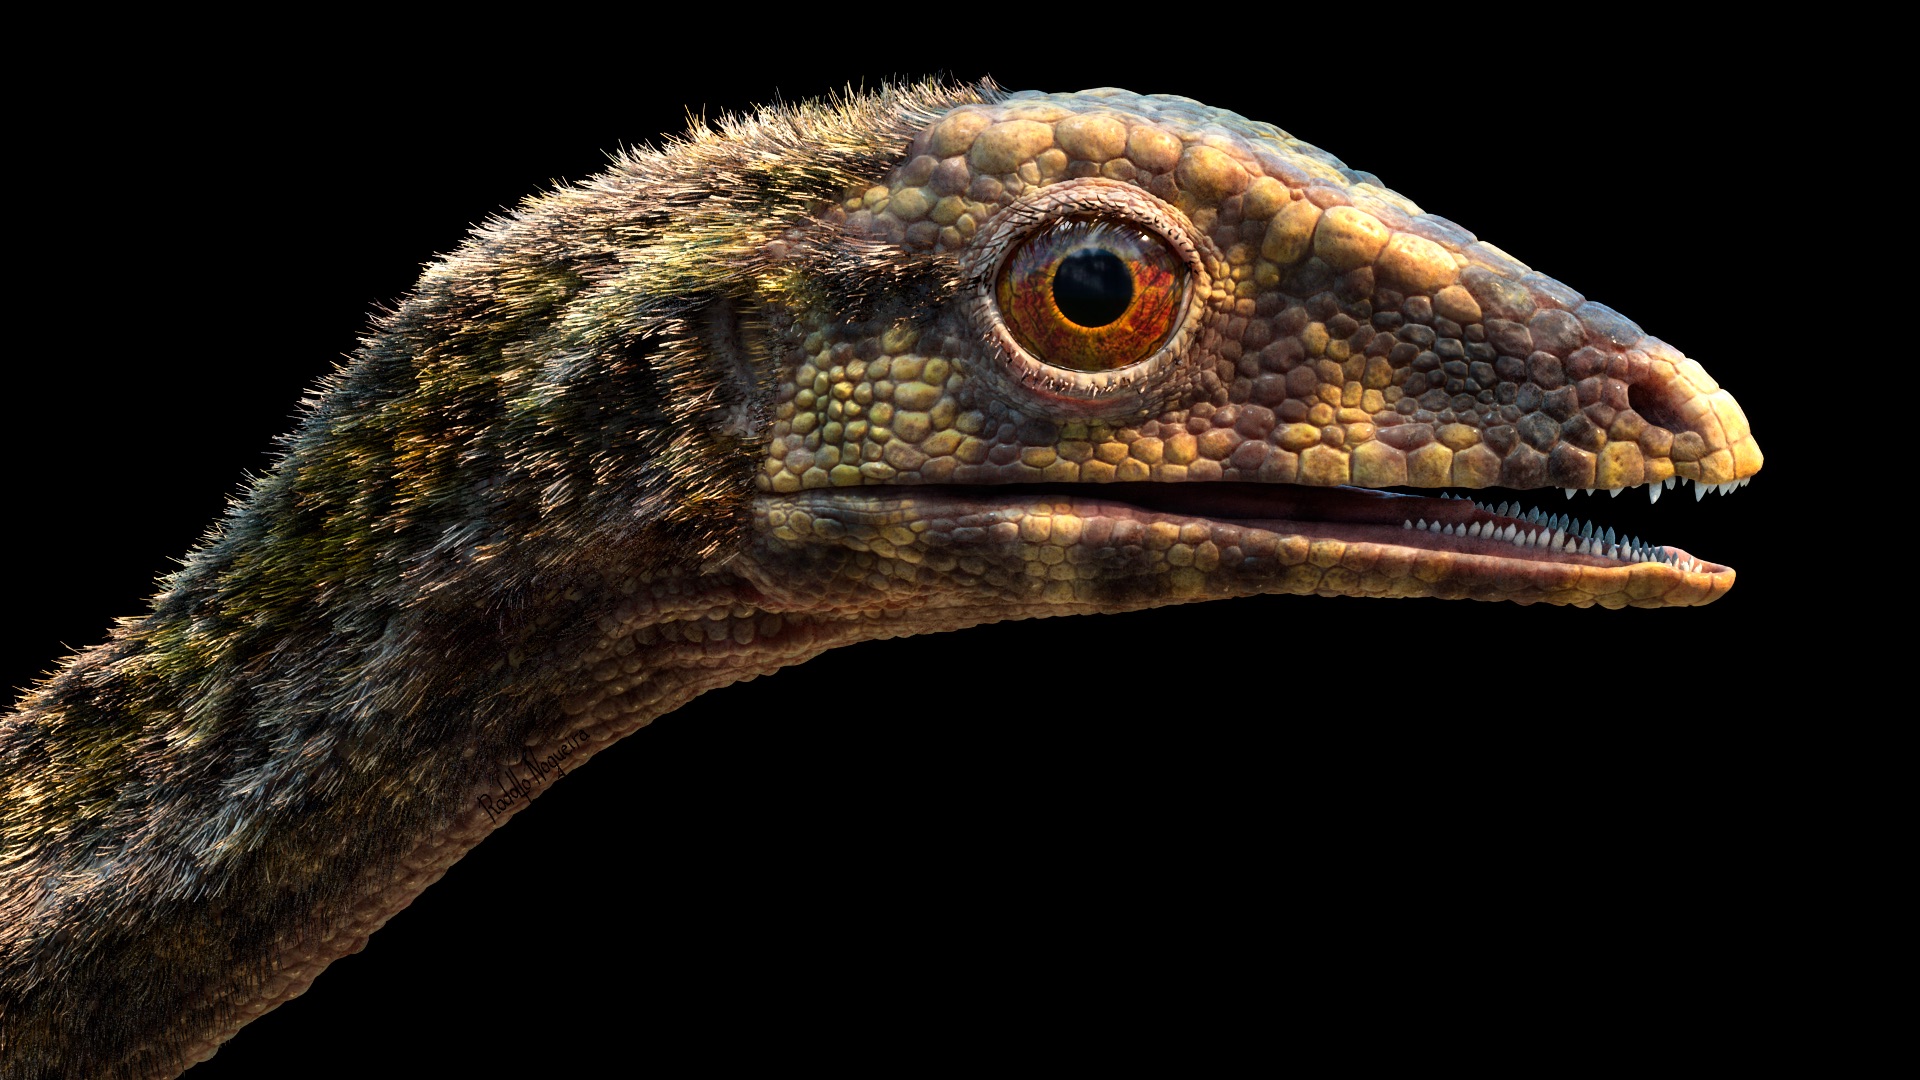 Like other lagerpetids, the species Ixalerpeton is likely a close relative of pterosaurs.